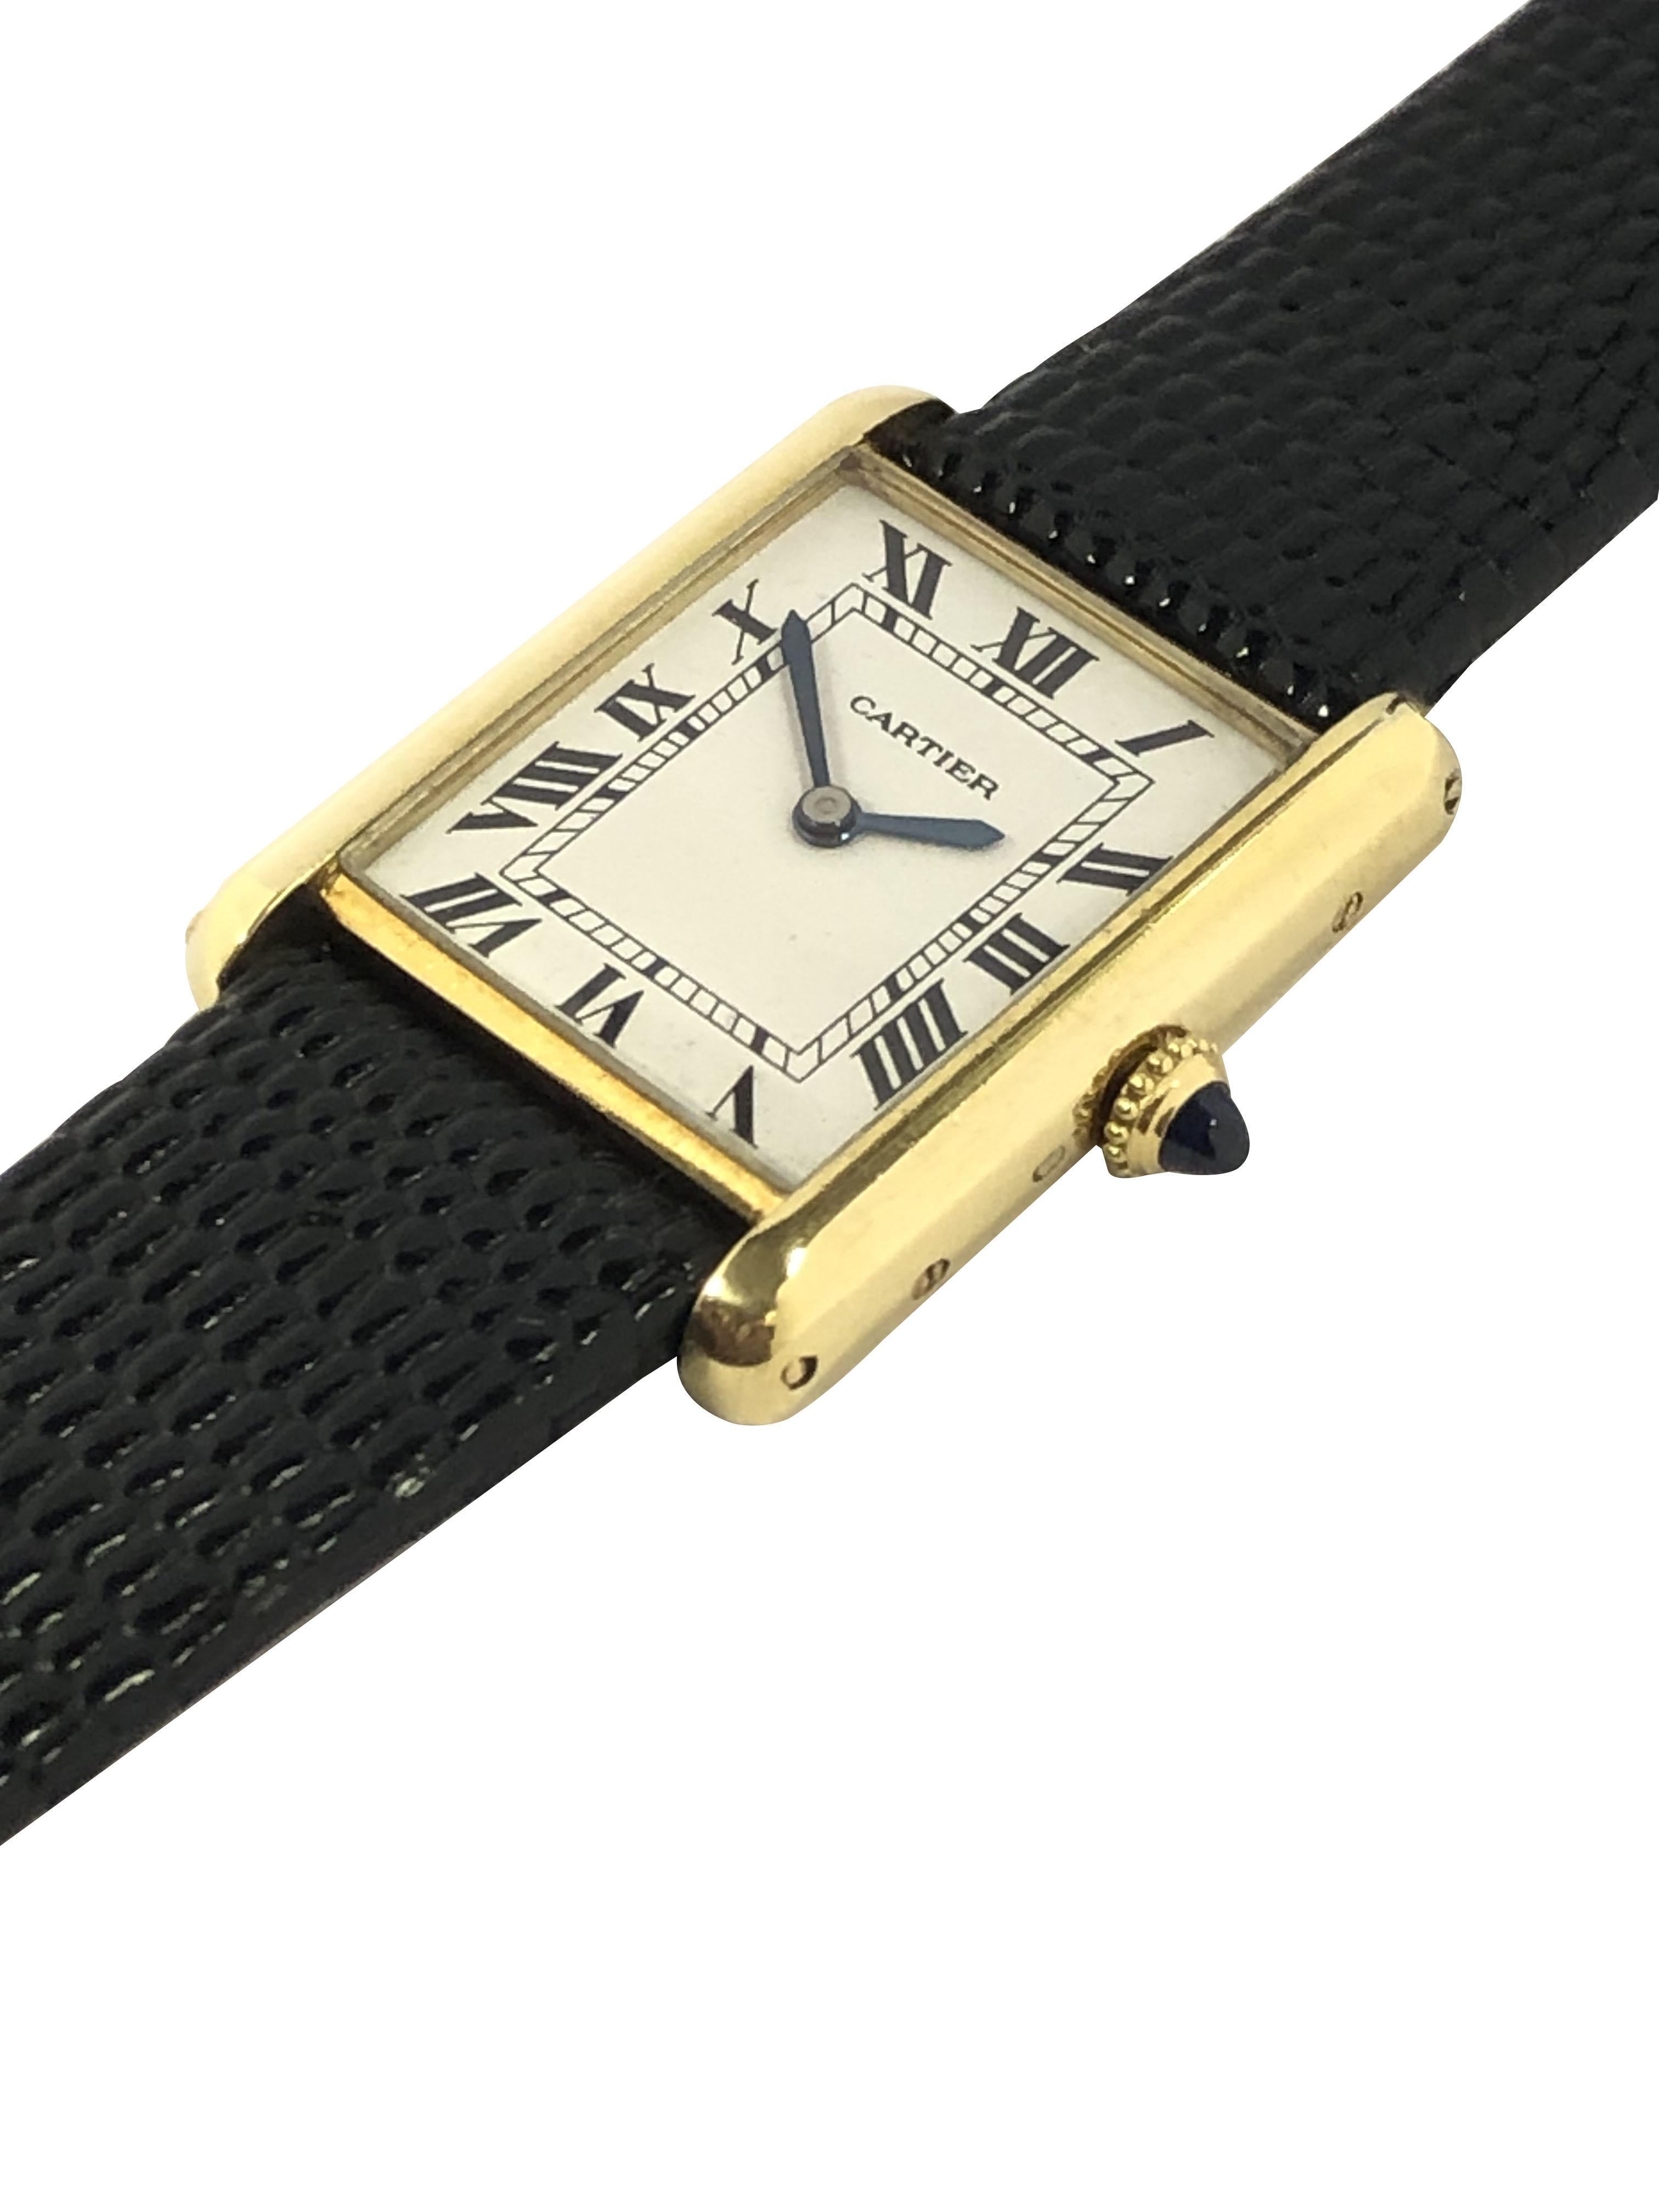 Circa 1980s Cartier Tank collection Wrist Watch, 23 X 22 M.M. 18k Yellow Gold 2 Piece case, 17 Jewel Cartier Inc. mechanical, manual wind movement, Sapphire Crown, White dial with Black Roman Numerals. New Black Lizard Grain Strap. Comes in a